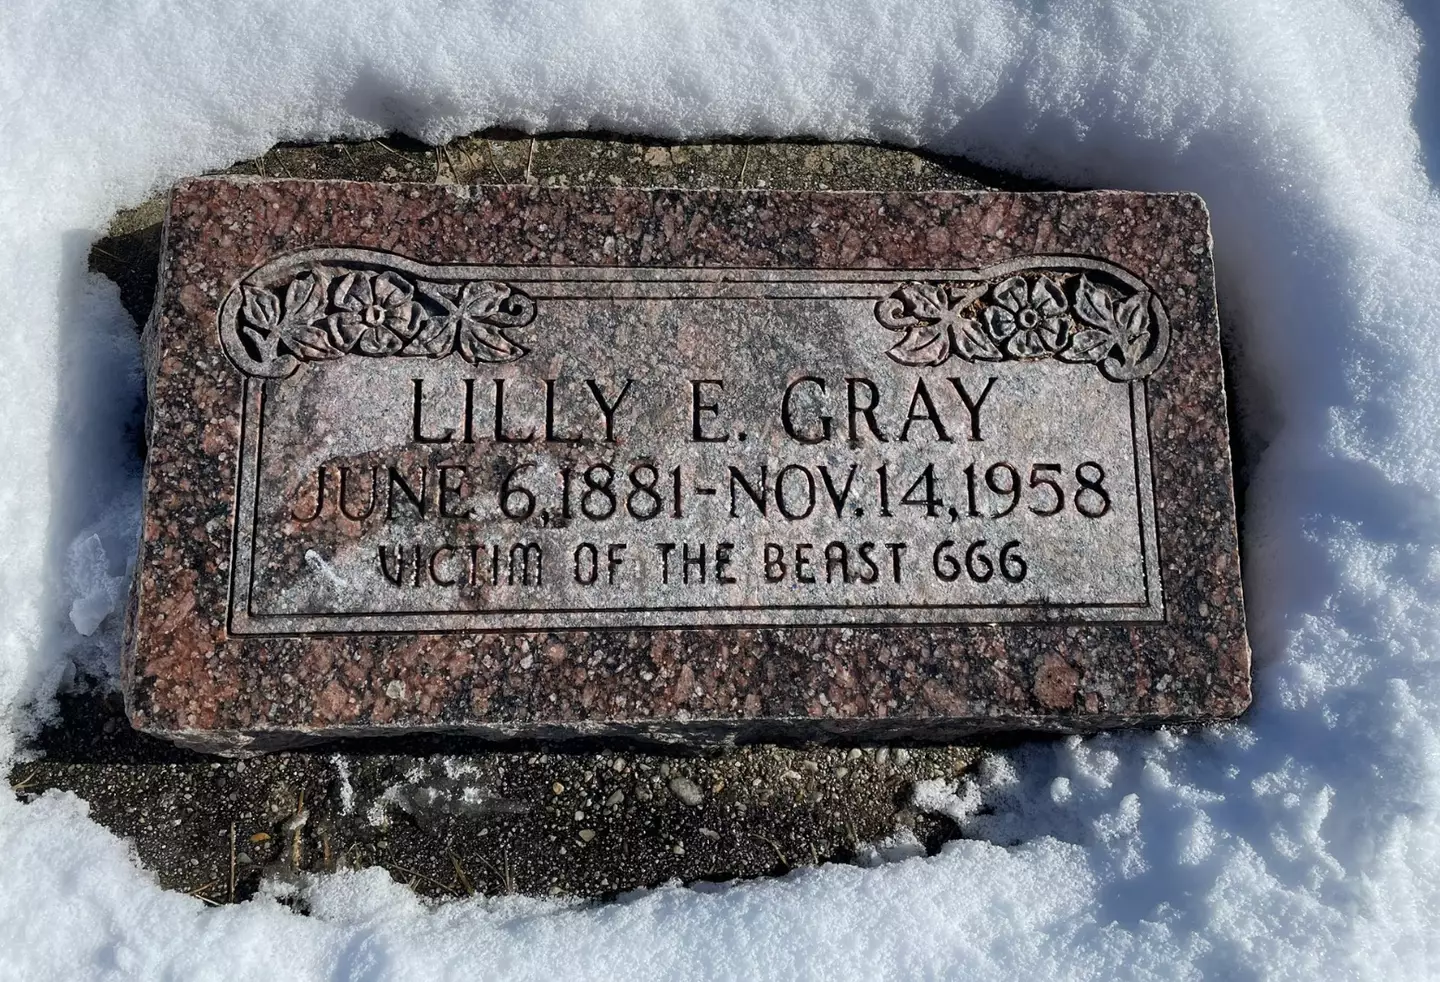 Lilly Gray's husband was the one to order the graveston.